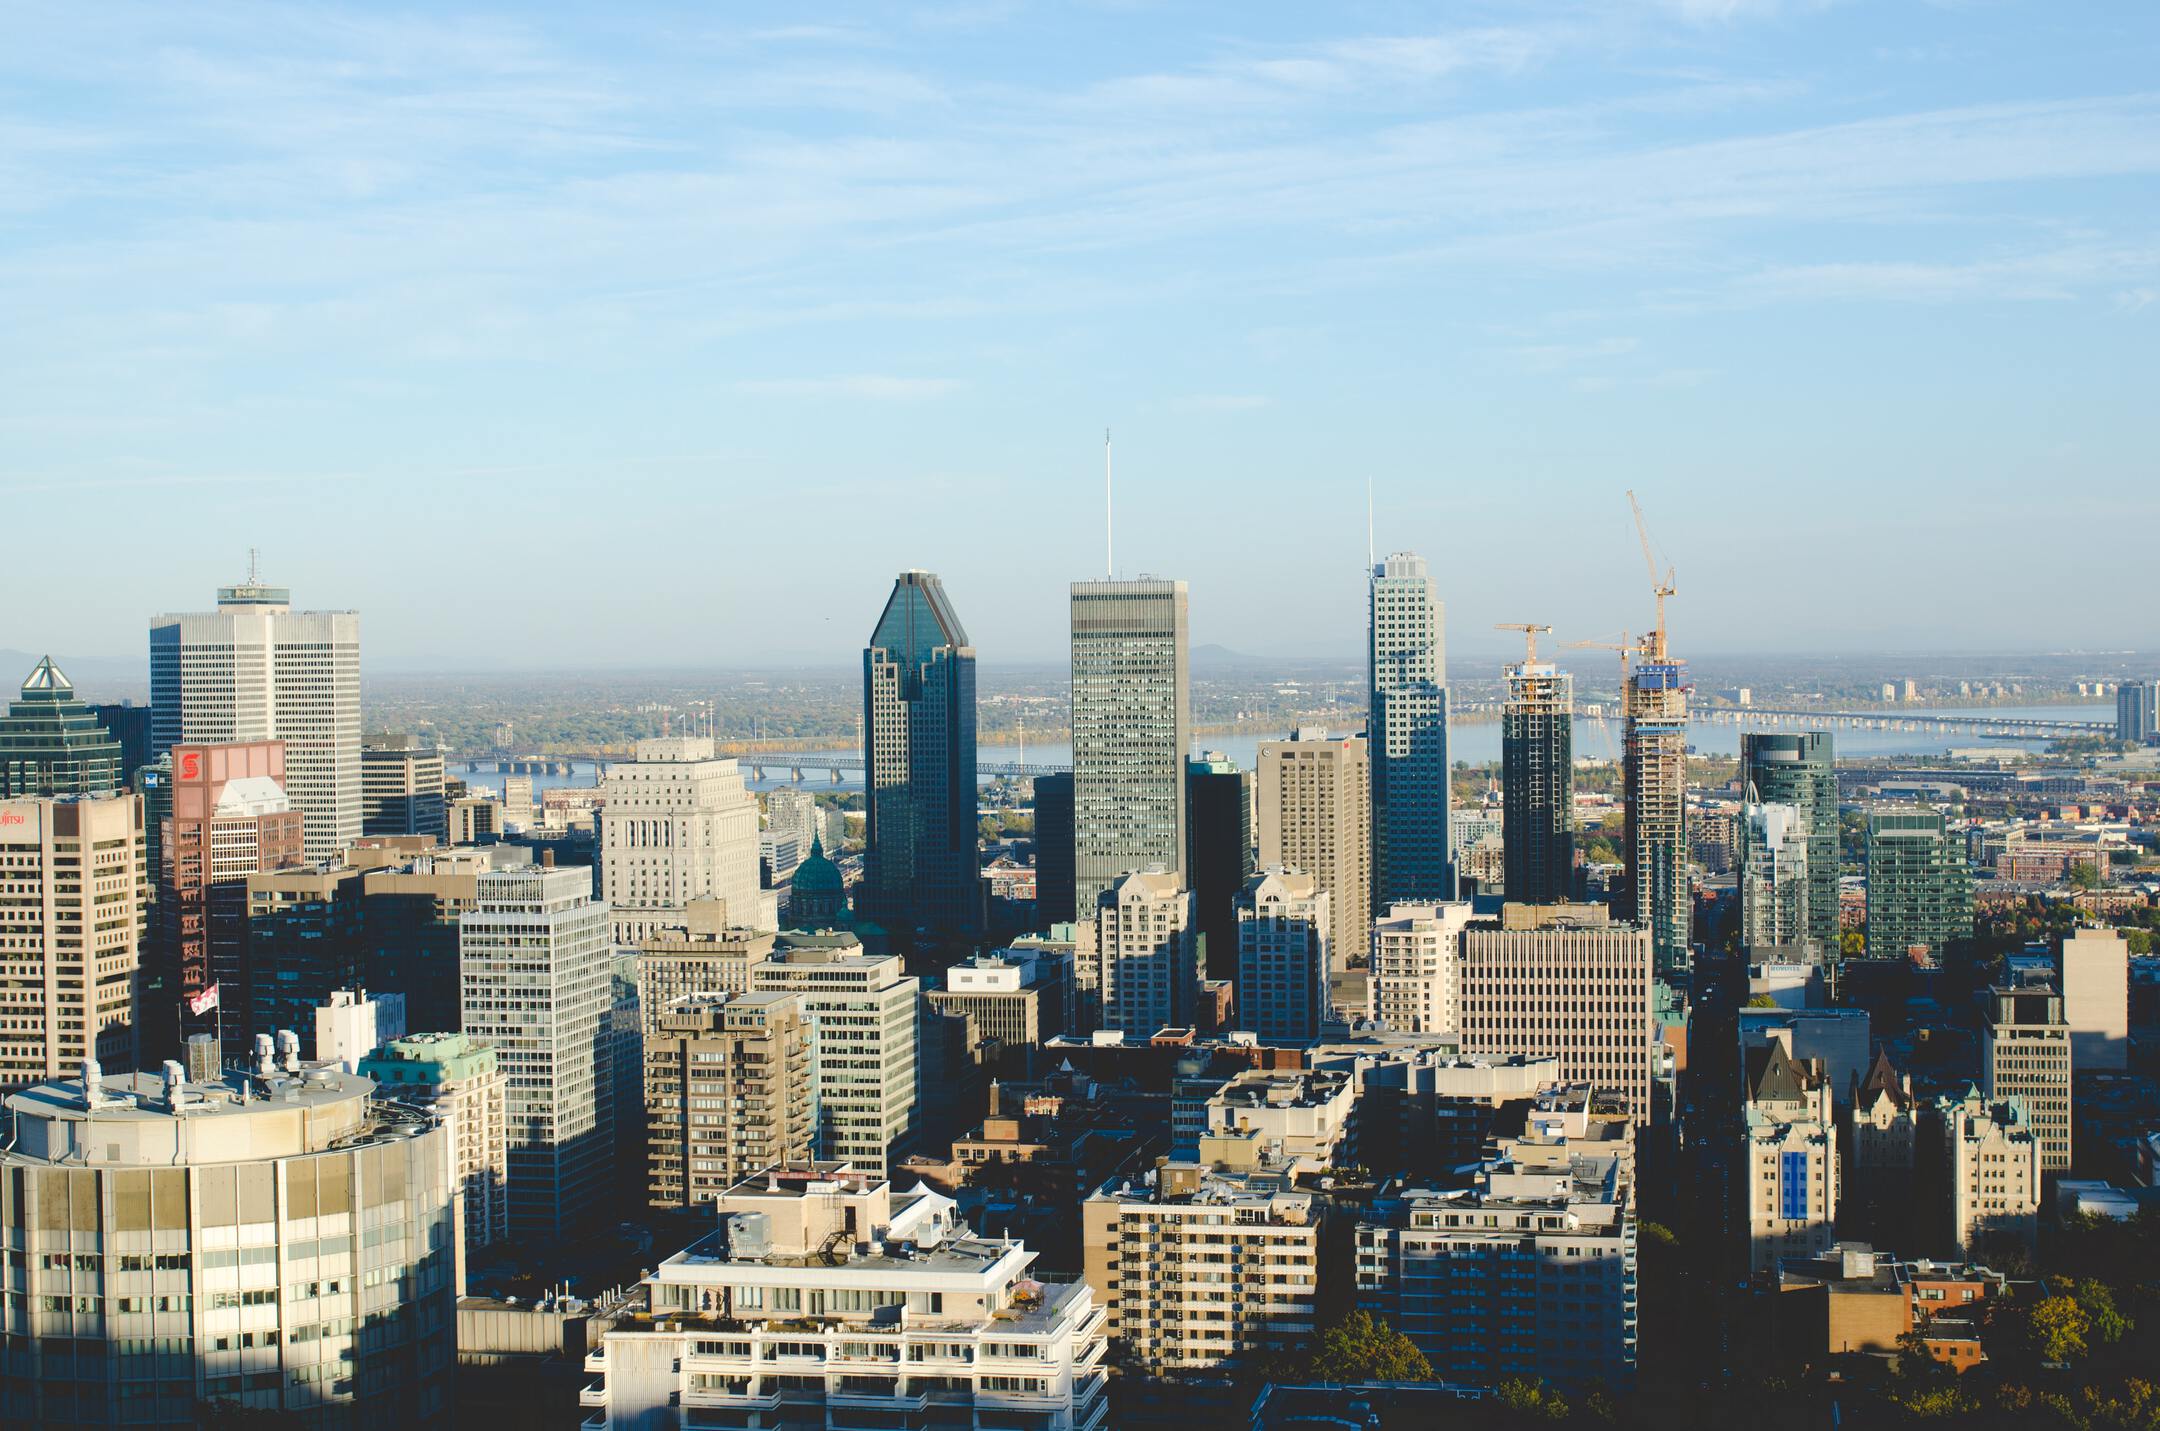 Image of a Montreal skyline